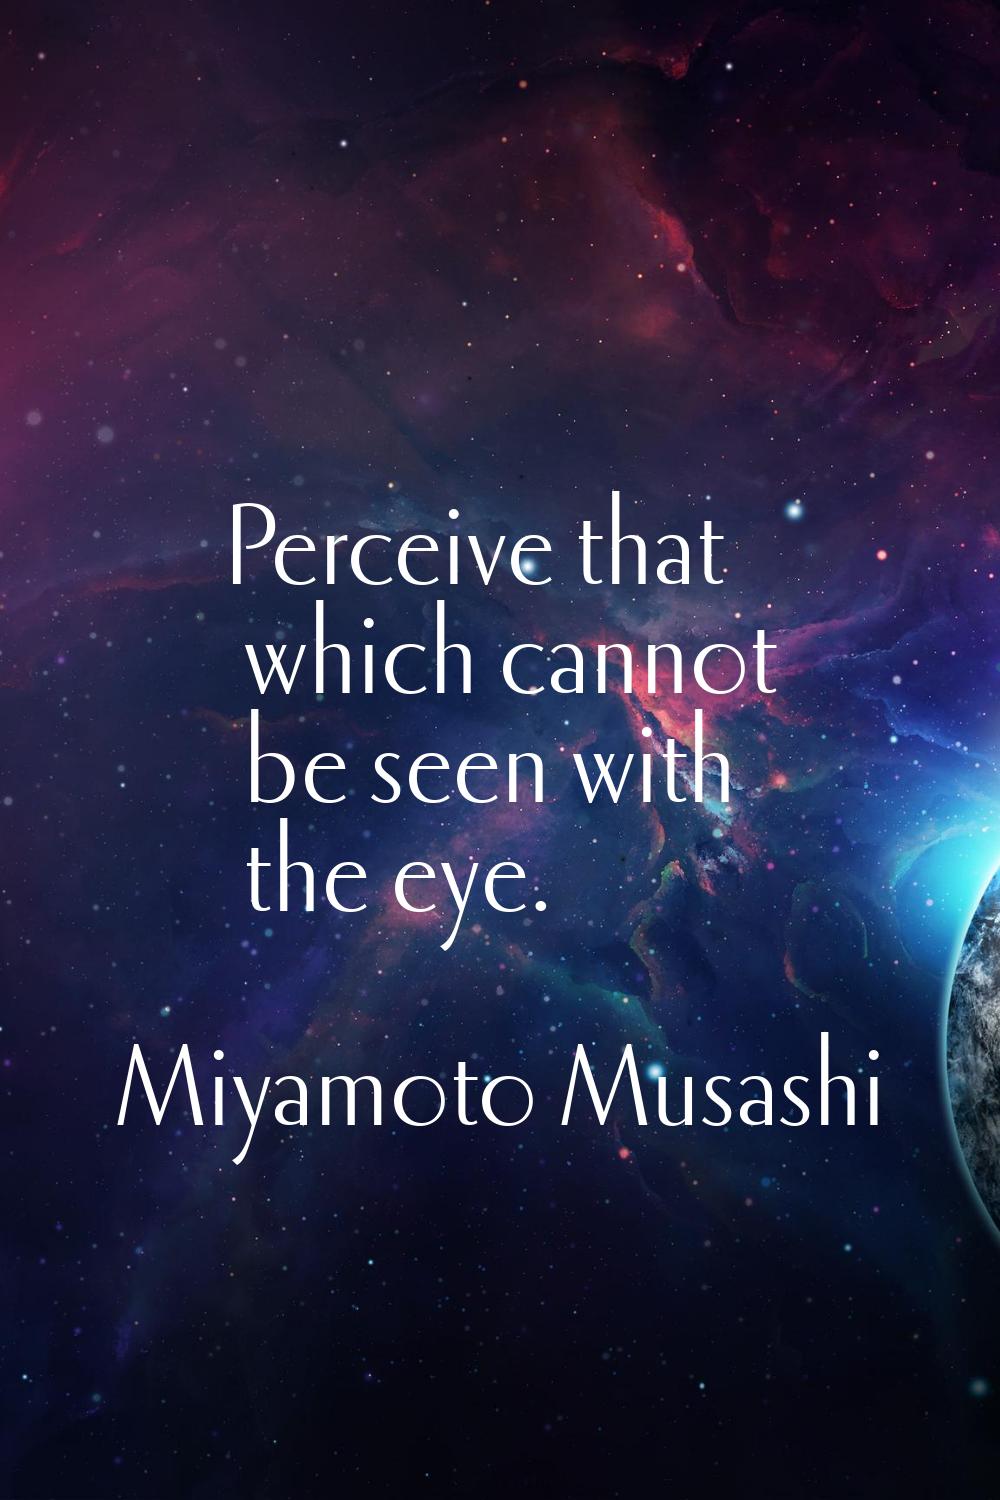 Perceive that which cannot be seen with the eye.